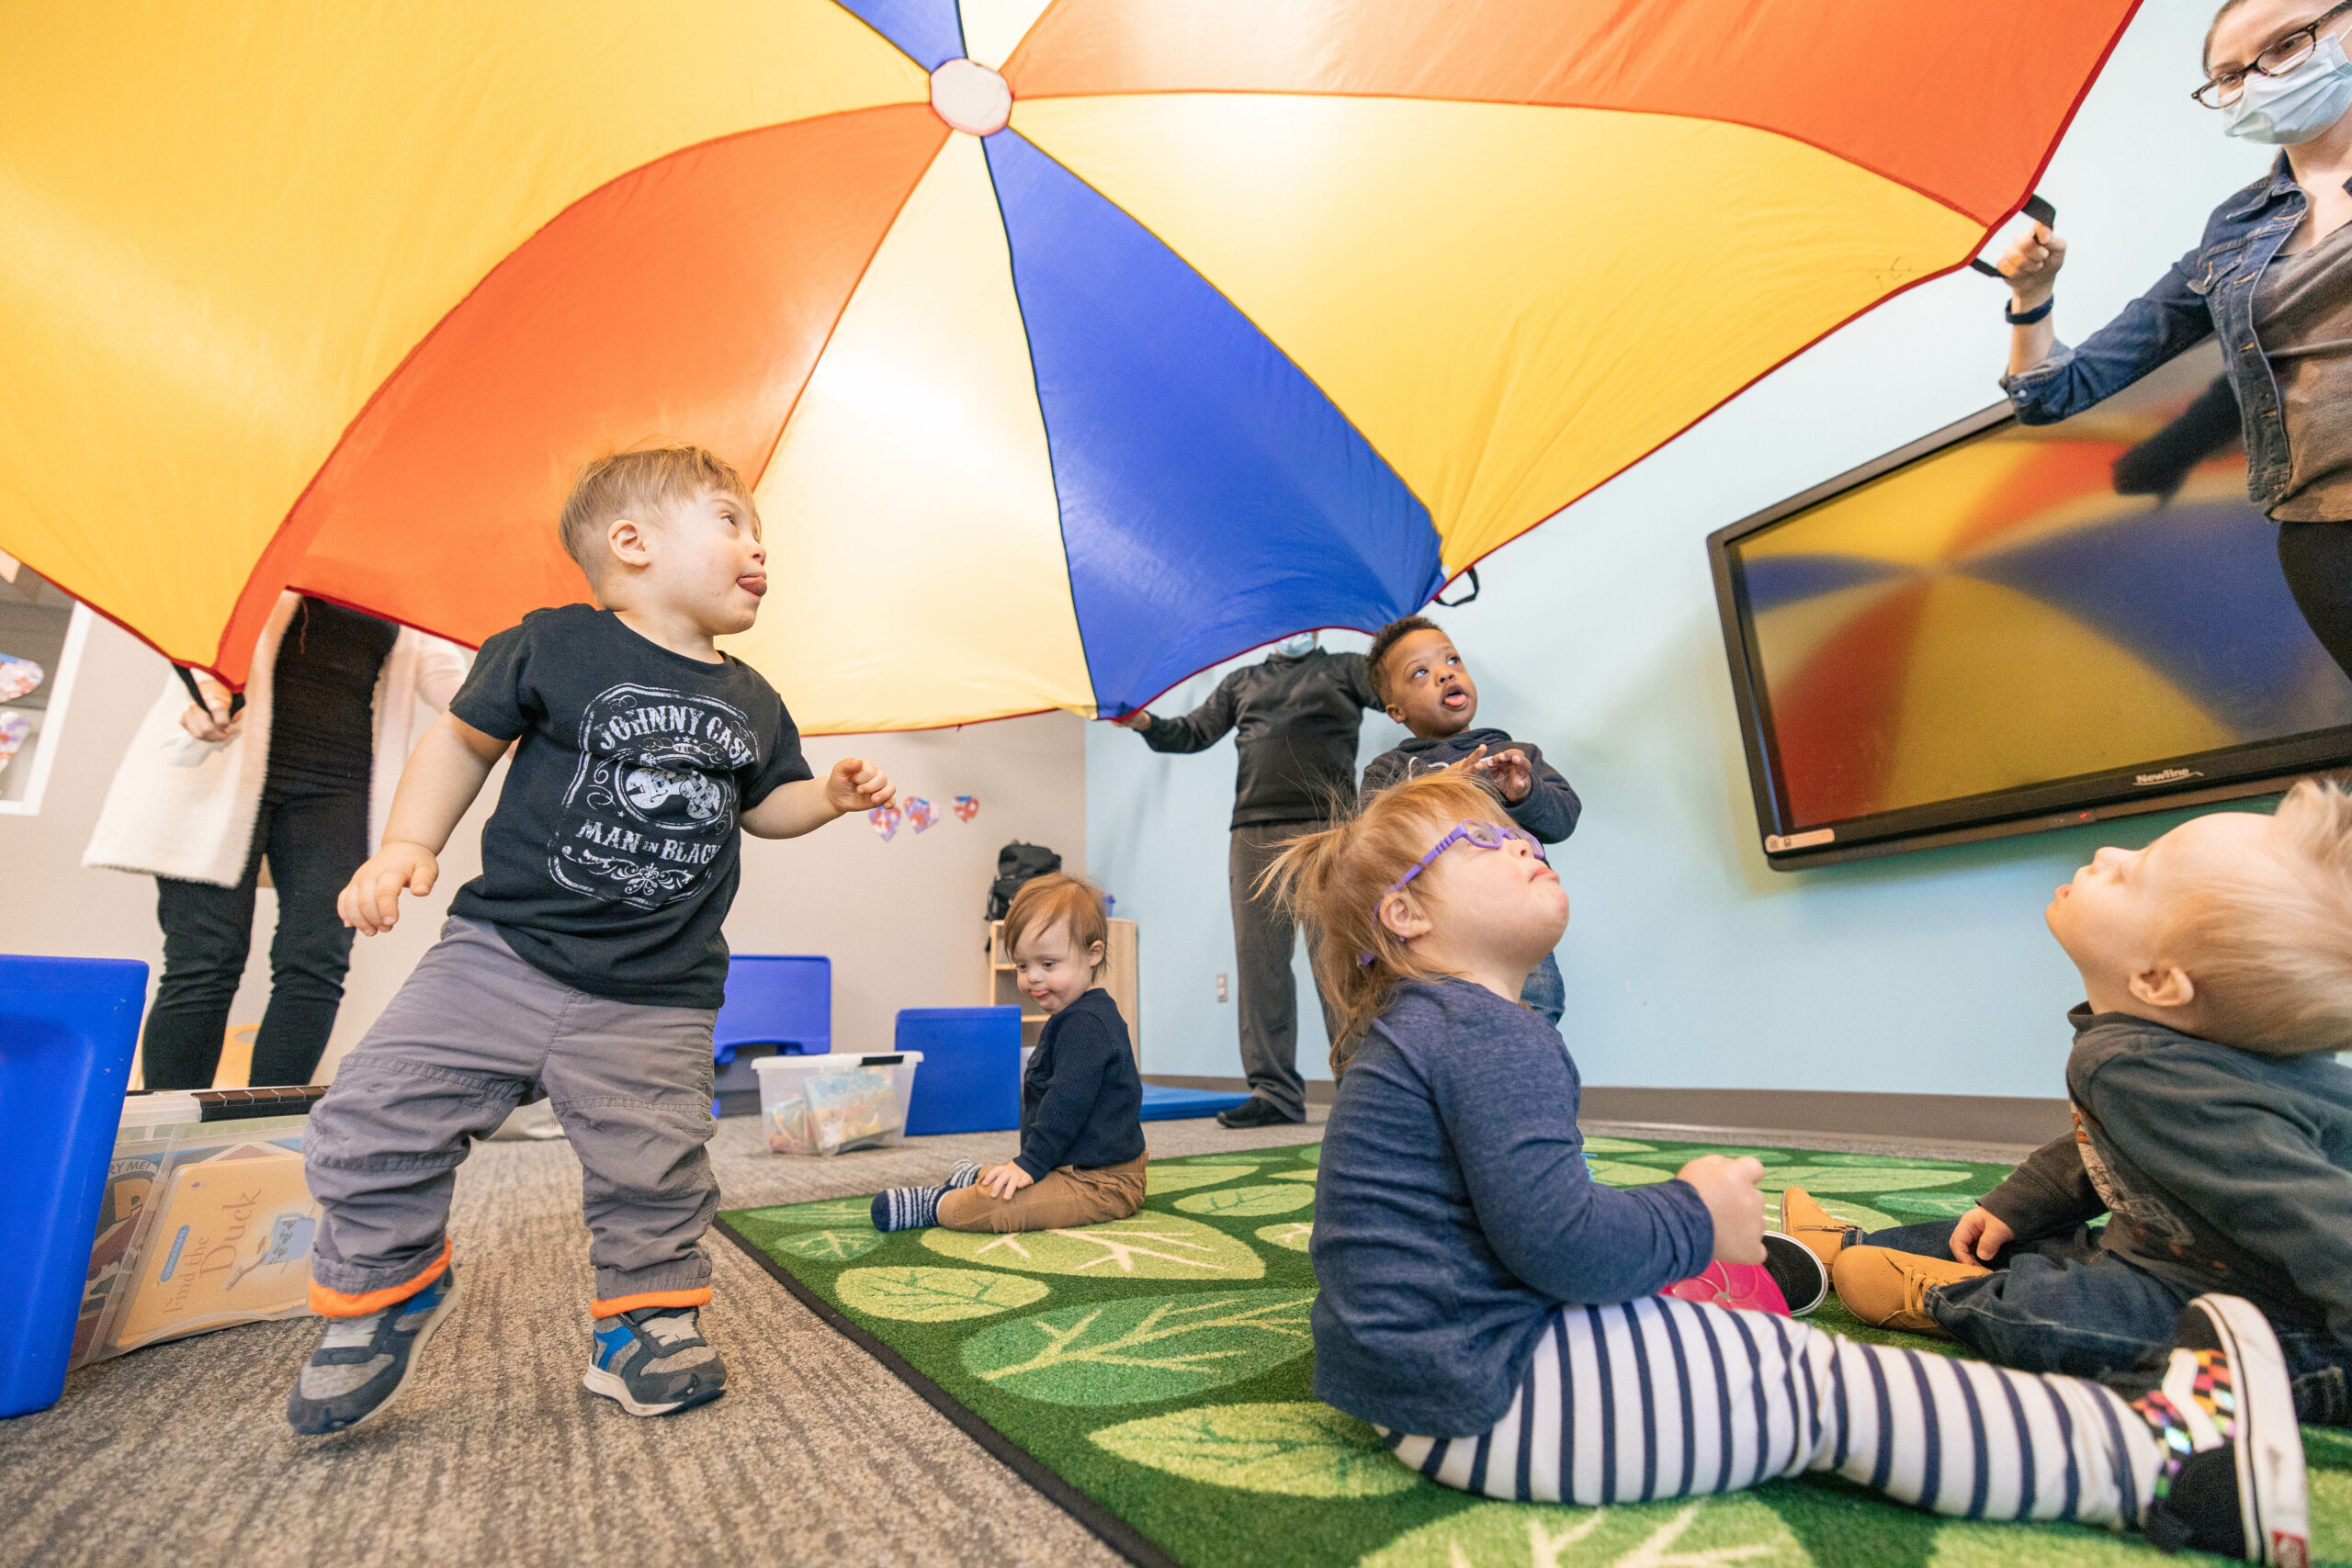 Group of toddlers in an early intervention class watching a play parachute go up and down